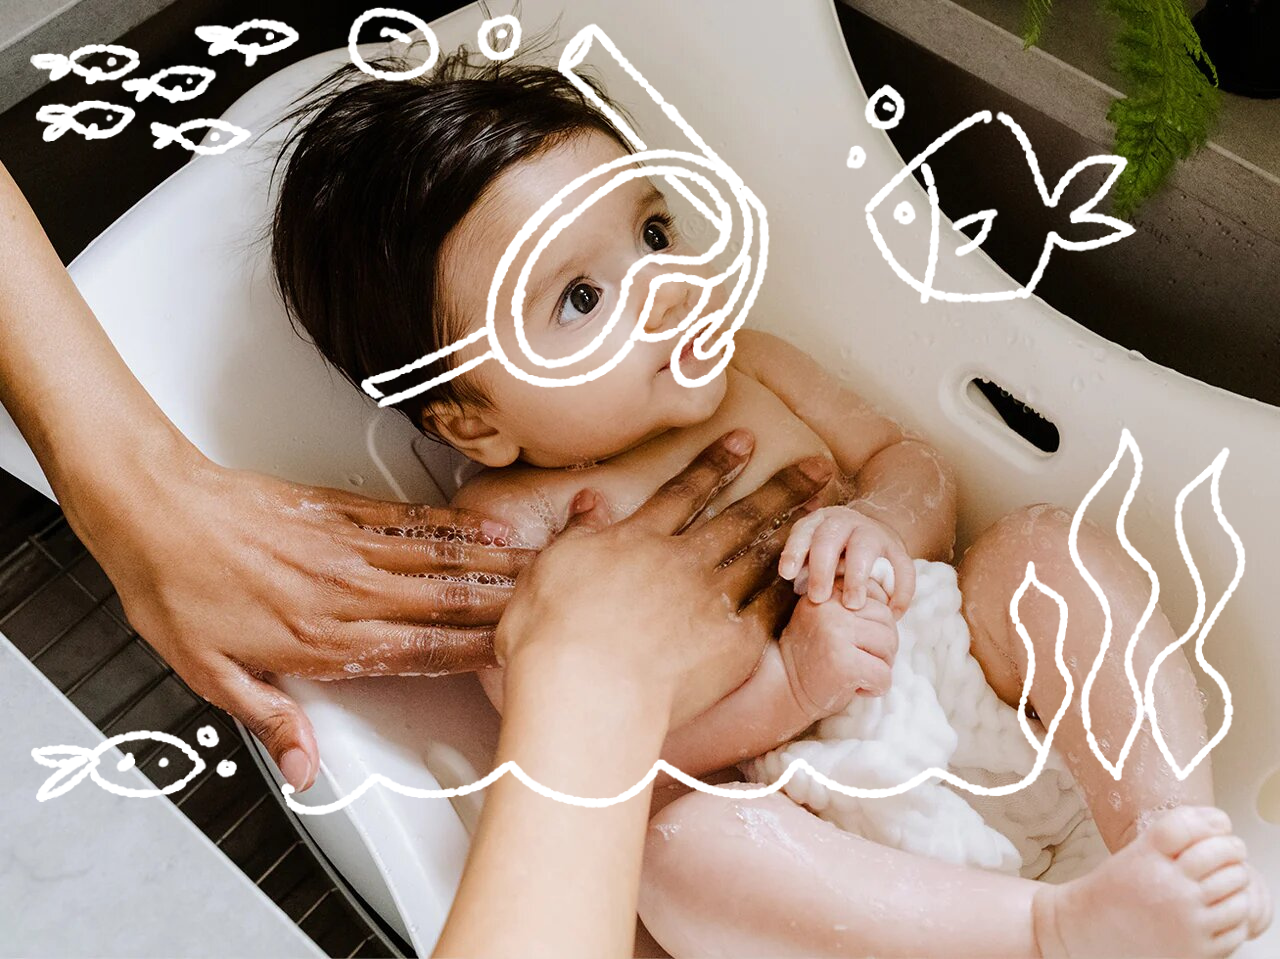 Nervous about Baby's first bath? Let us walk you through it: